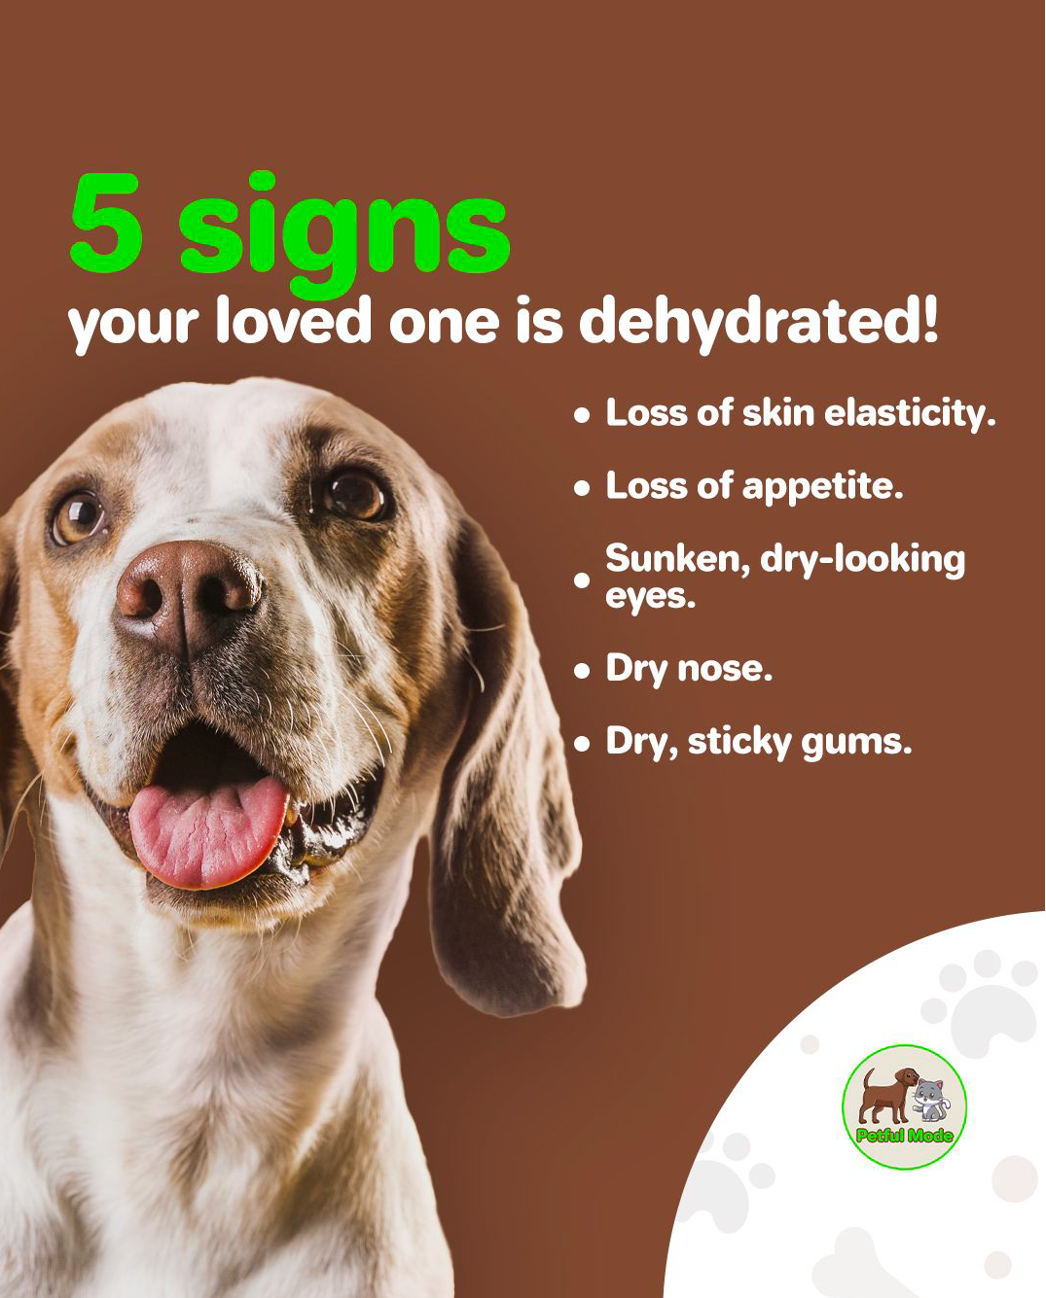 Protect Your Furry Companion: 5 Signs of Dehydration to Watch For!